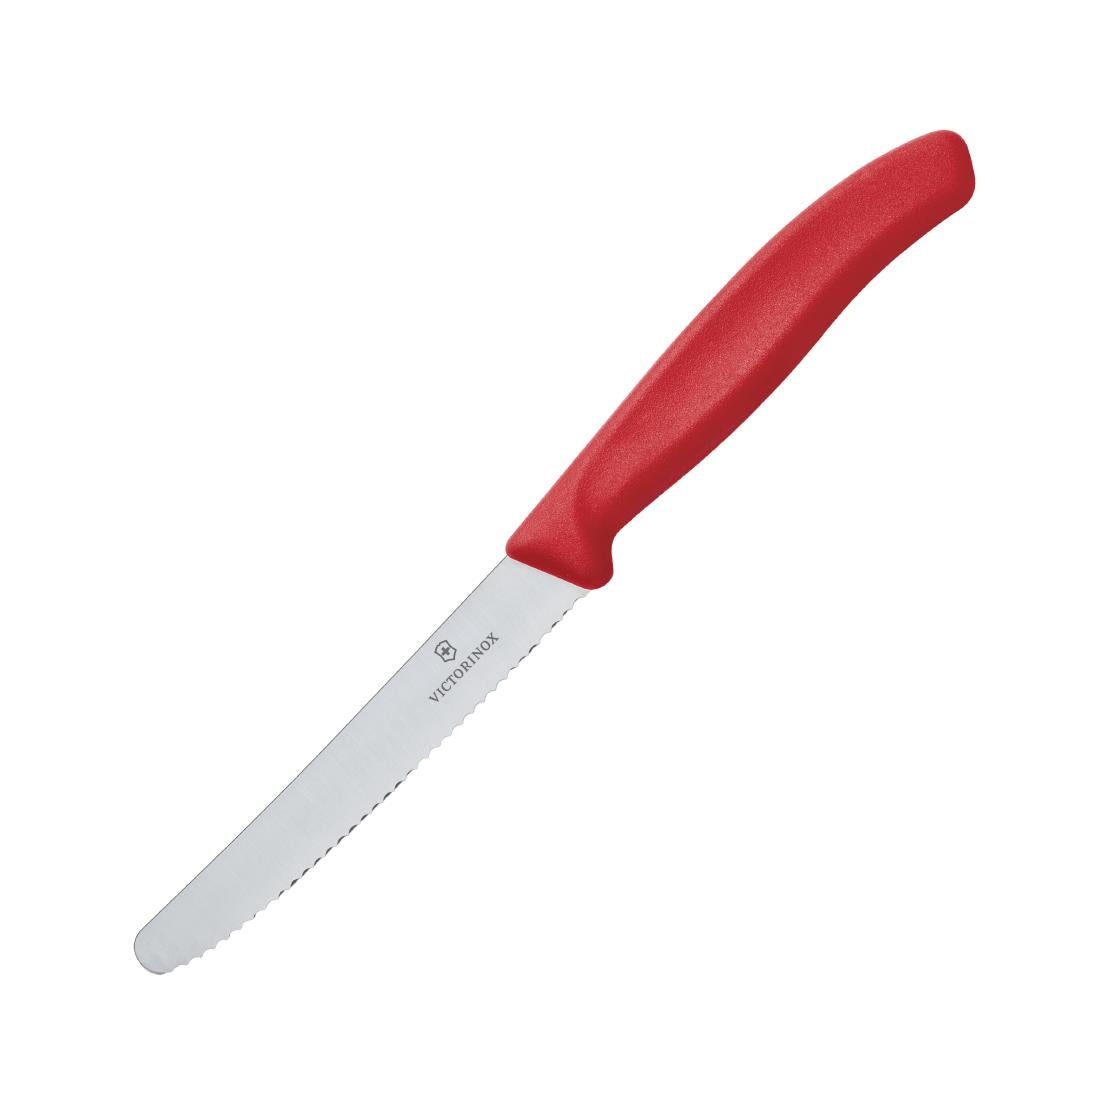 CX751 Victorinox Tomato/Utility Knife Serrated Edge 11cm Red JD Catering Equipment Solutions Ltd